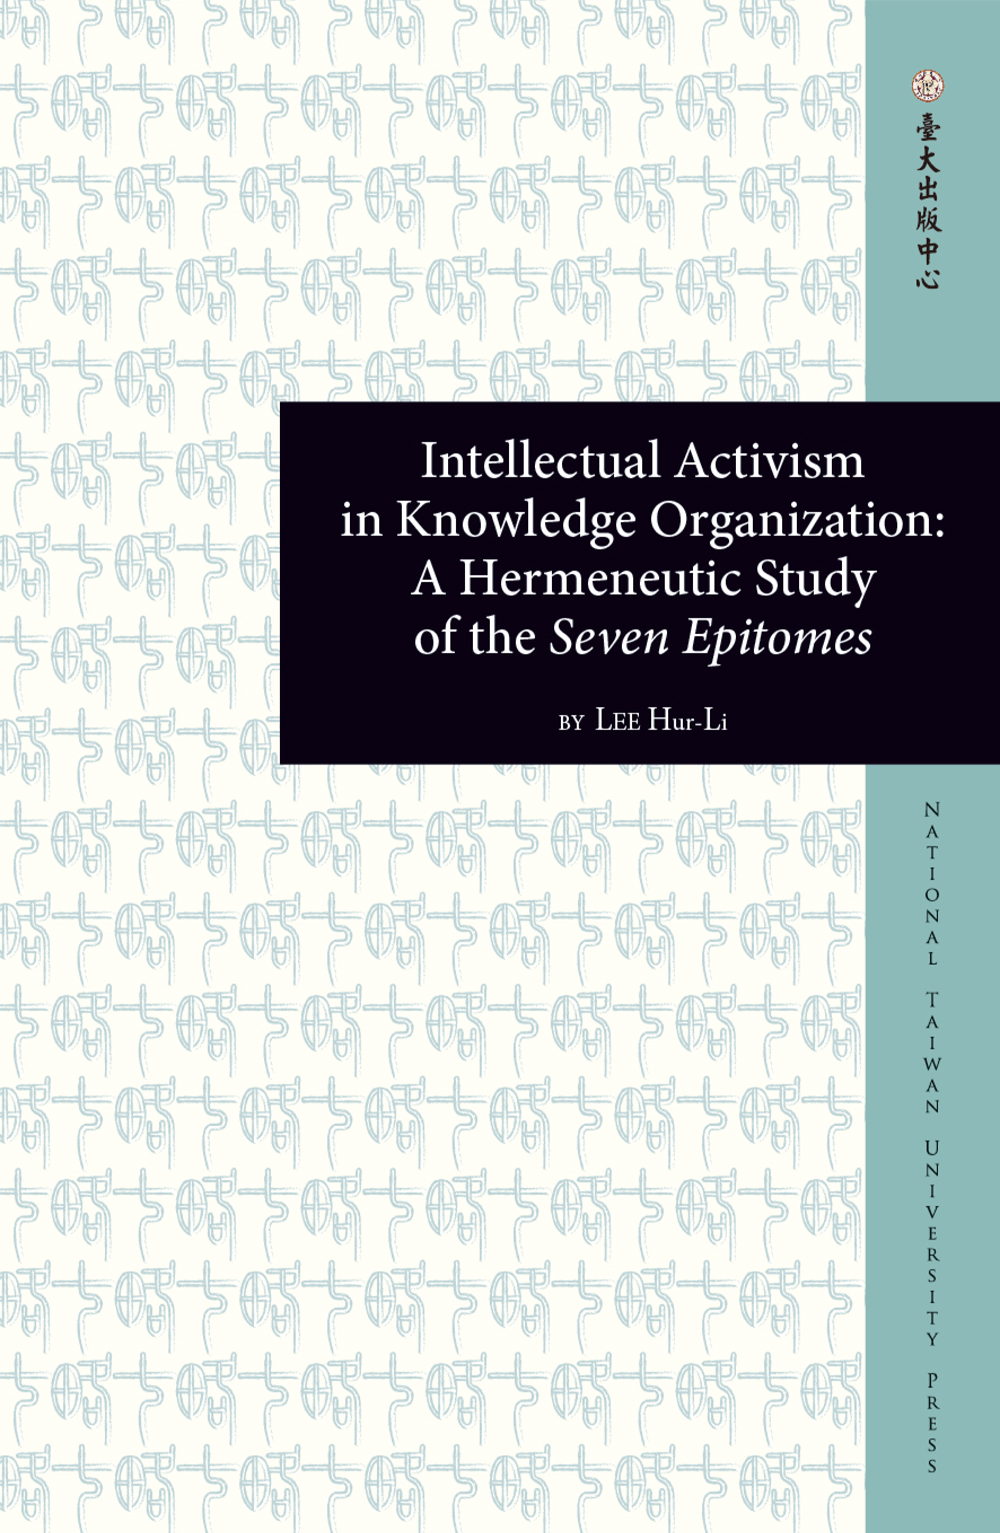 Intellectual Activism in Knowledge Organization: A Hermeneutic Study of the Seven Epitomes